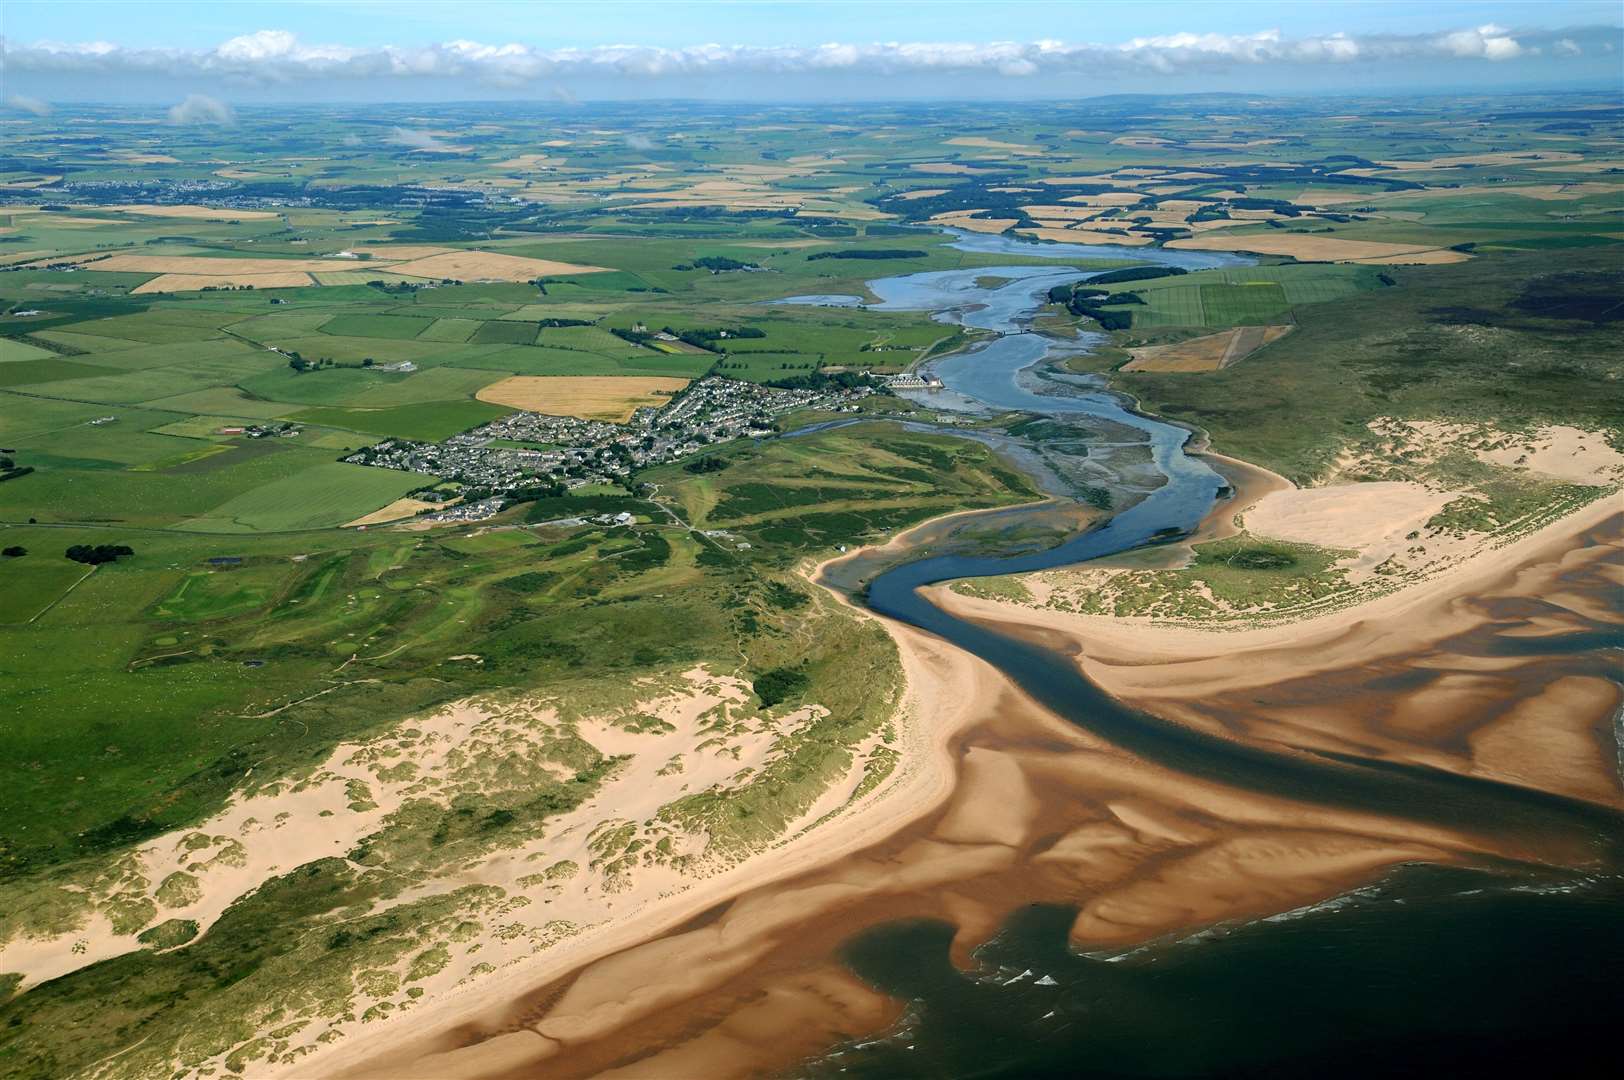 The East Grampian Coastal Partnership is seeking views from people who live or work on the Aberdeenshire coast.